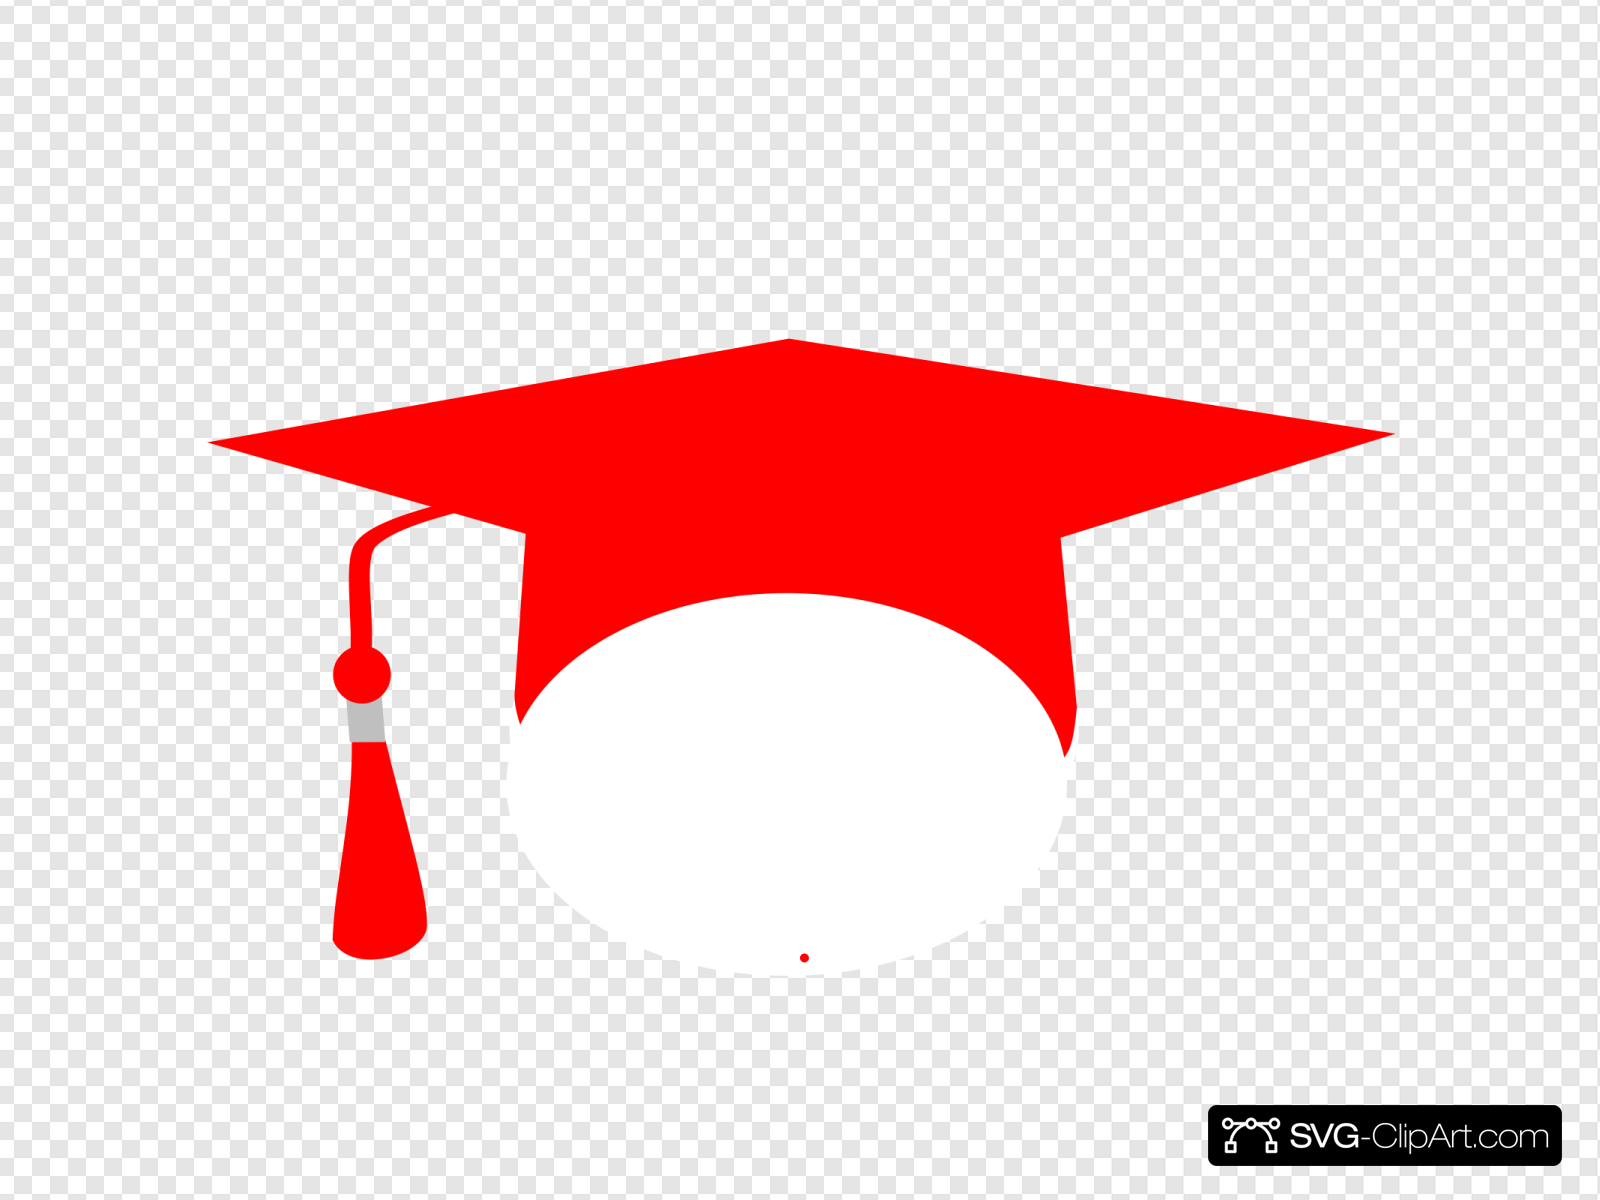 Red Graduation Cap Clip art, Icon and SVG